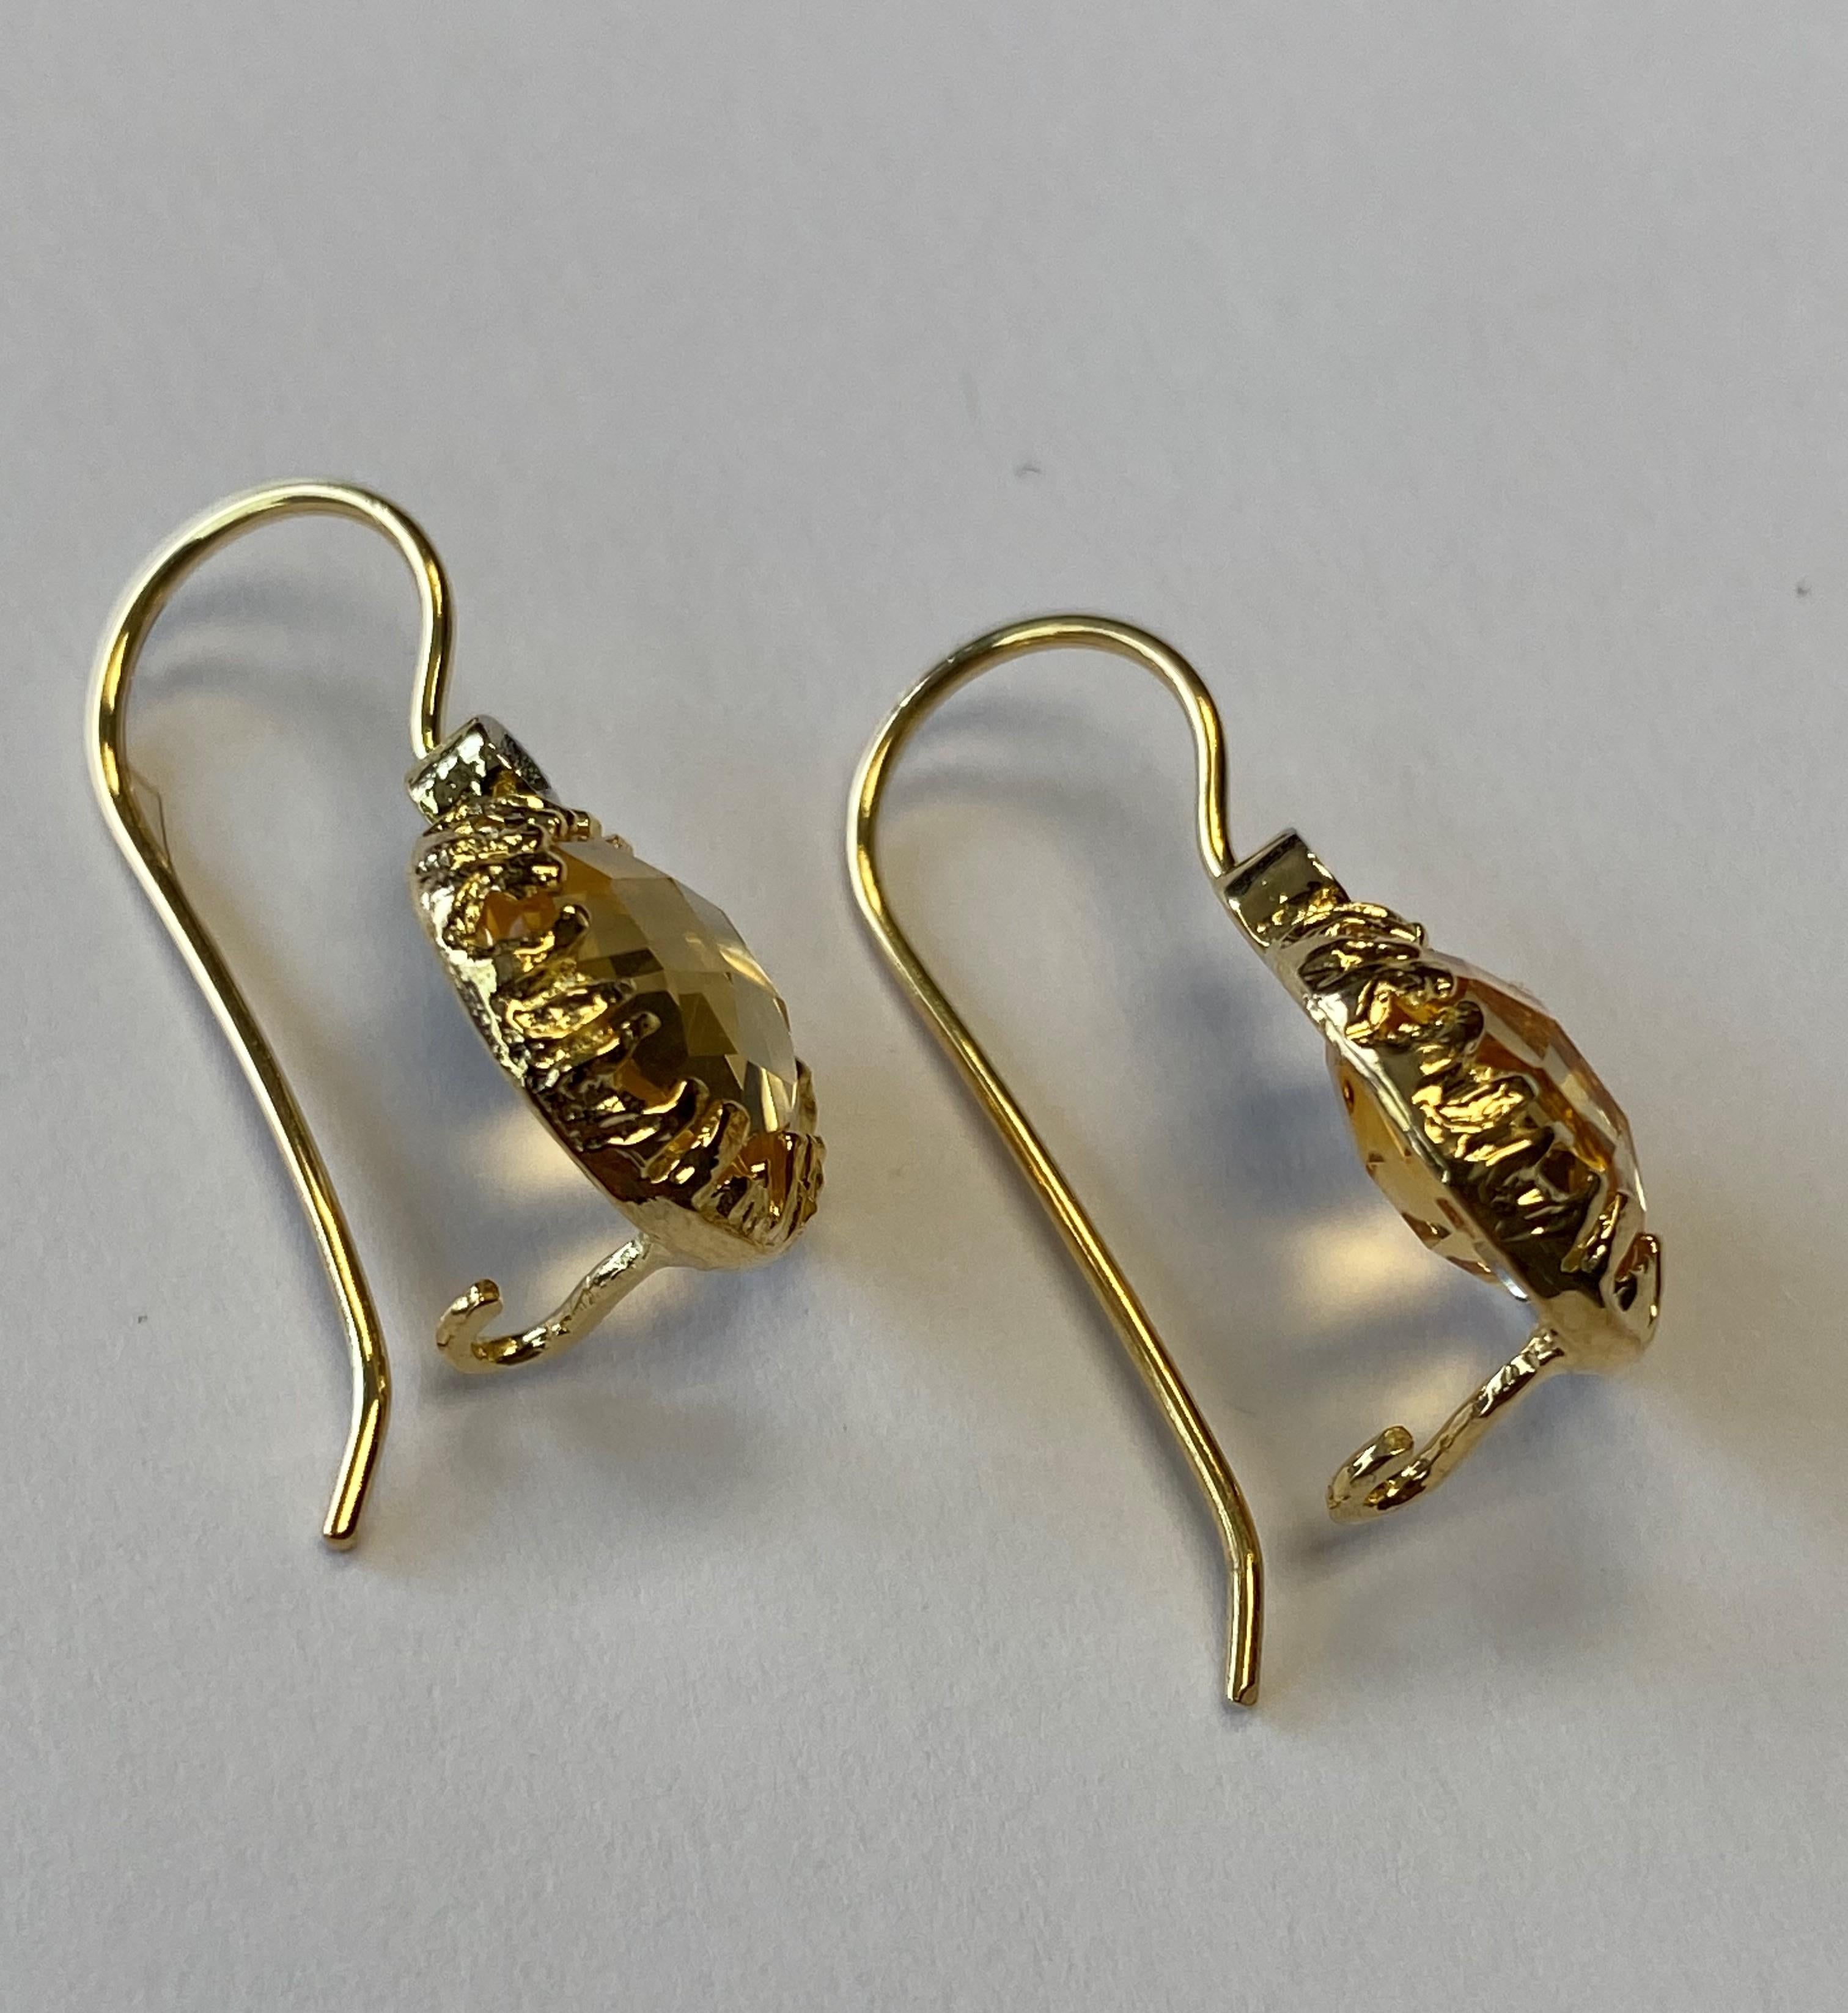 14 Karat Yellow Gold Hand-Crafted Polish-Finished Drop Earrings, Centered with a 10mm 6.7CT Round Checkerboard-Cut Semi-Precious Citrine Color Stone, Accented with 0.03 Carats of Bezel Set Diamonds on a Kidney Wire Back Finding
